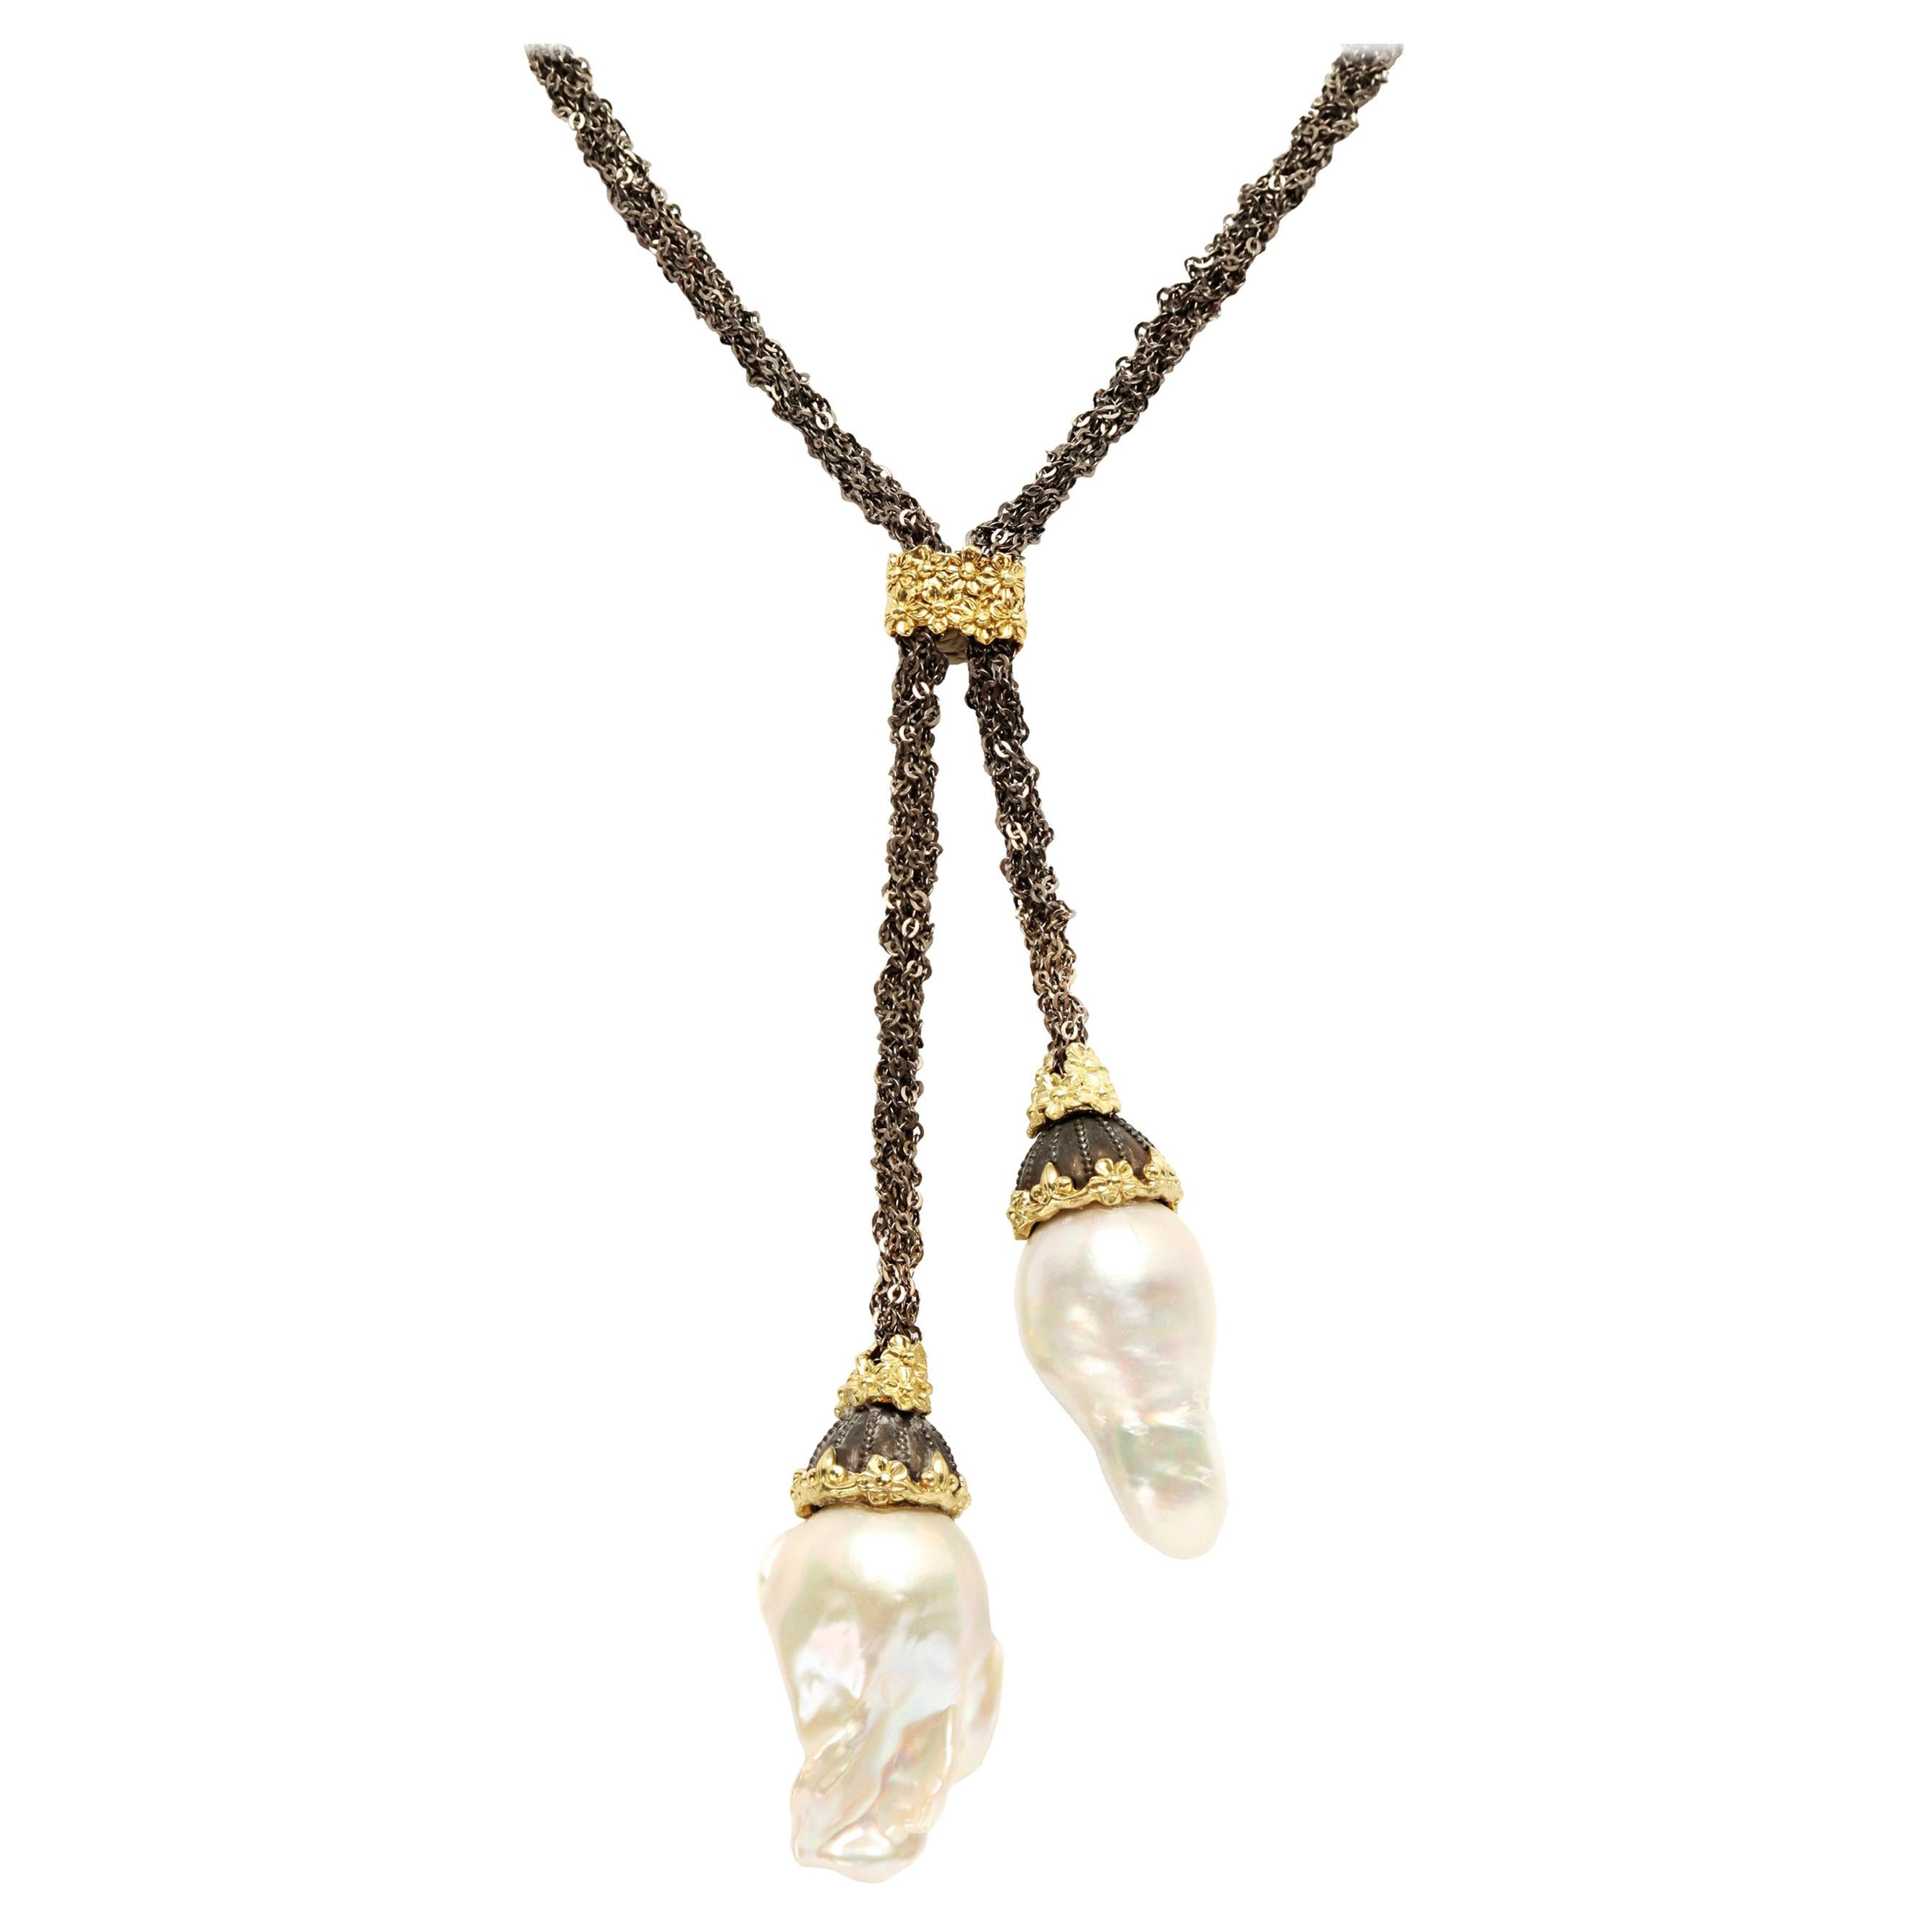 Darkened Silver and Gold Lariat Necklace with Baroque Pearl Drops Stambolian